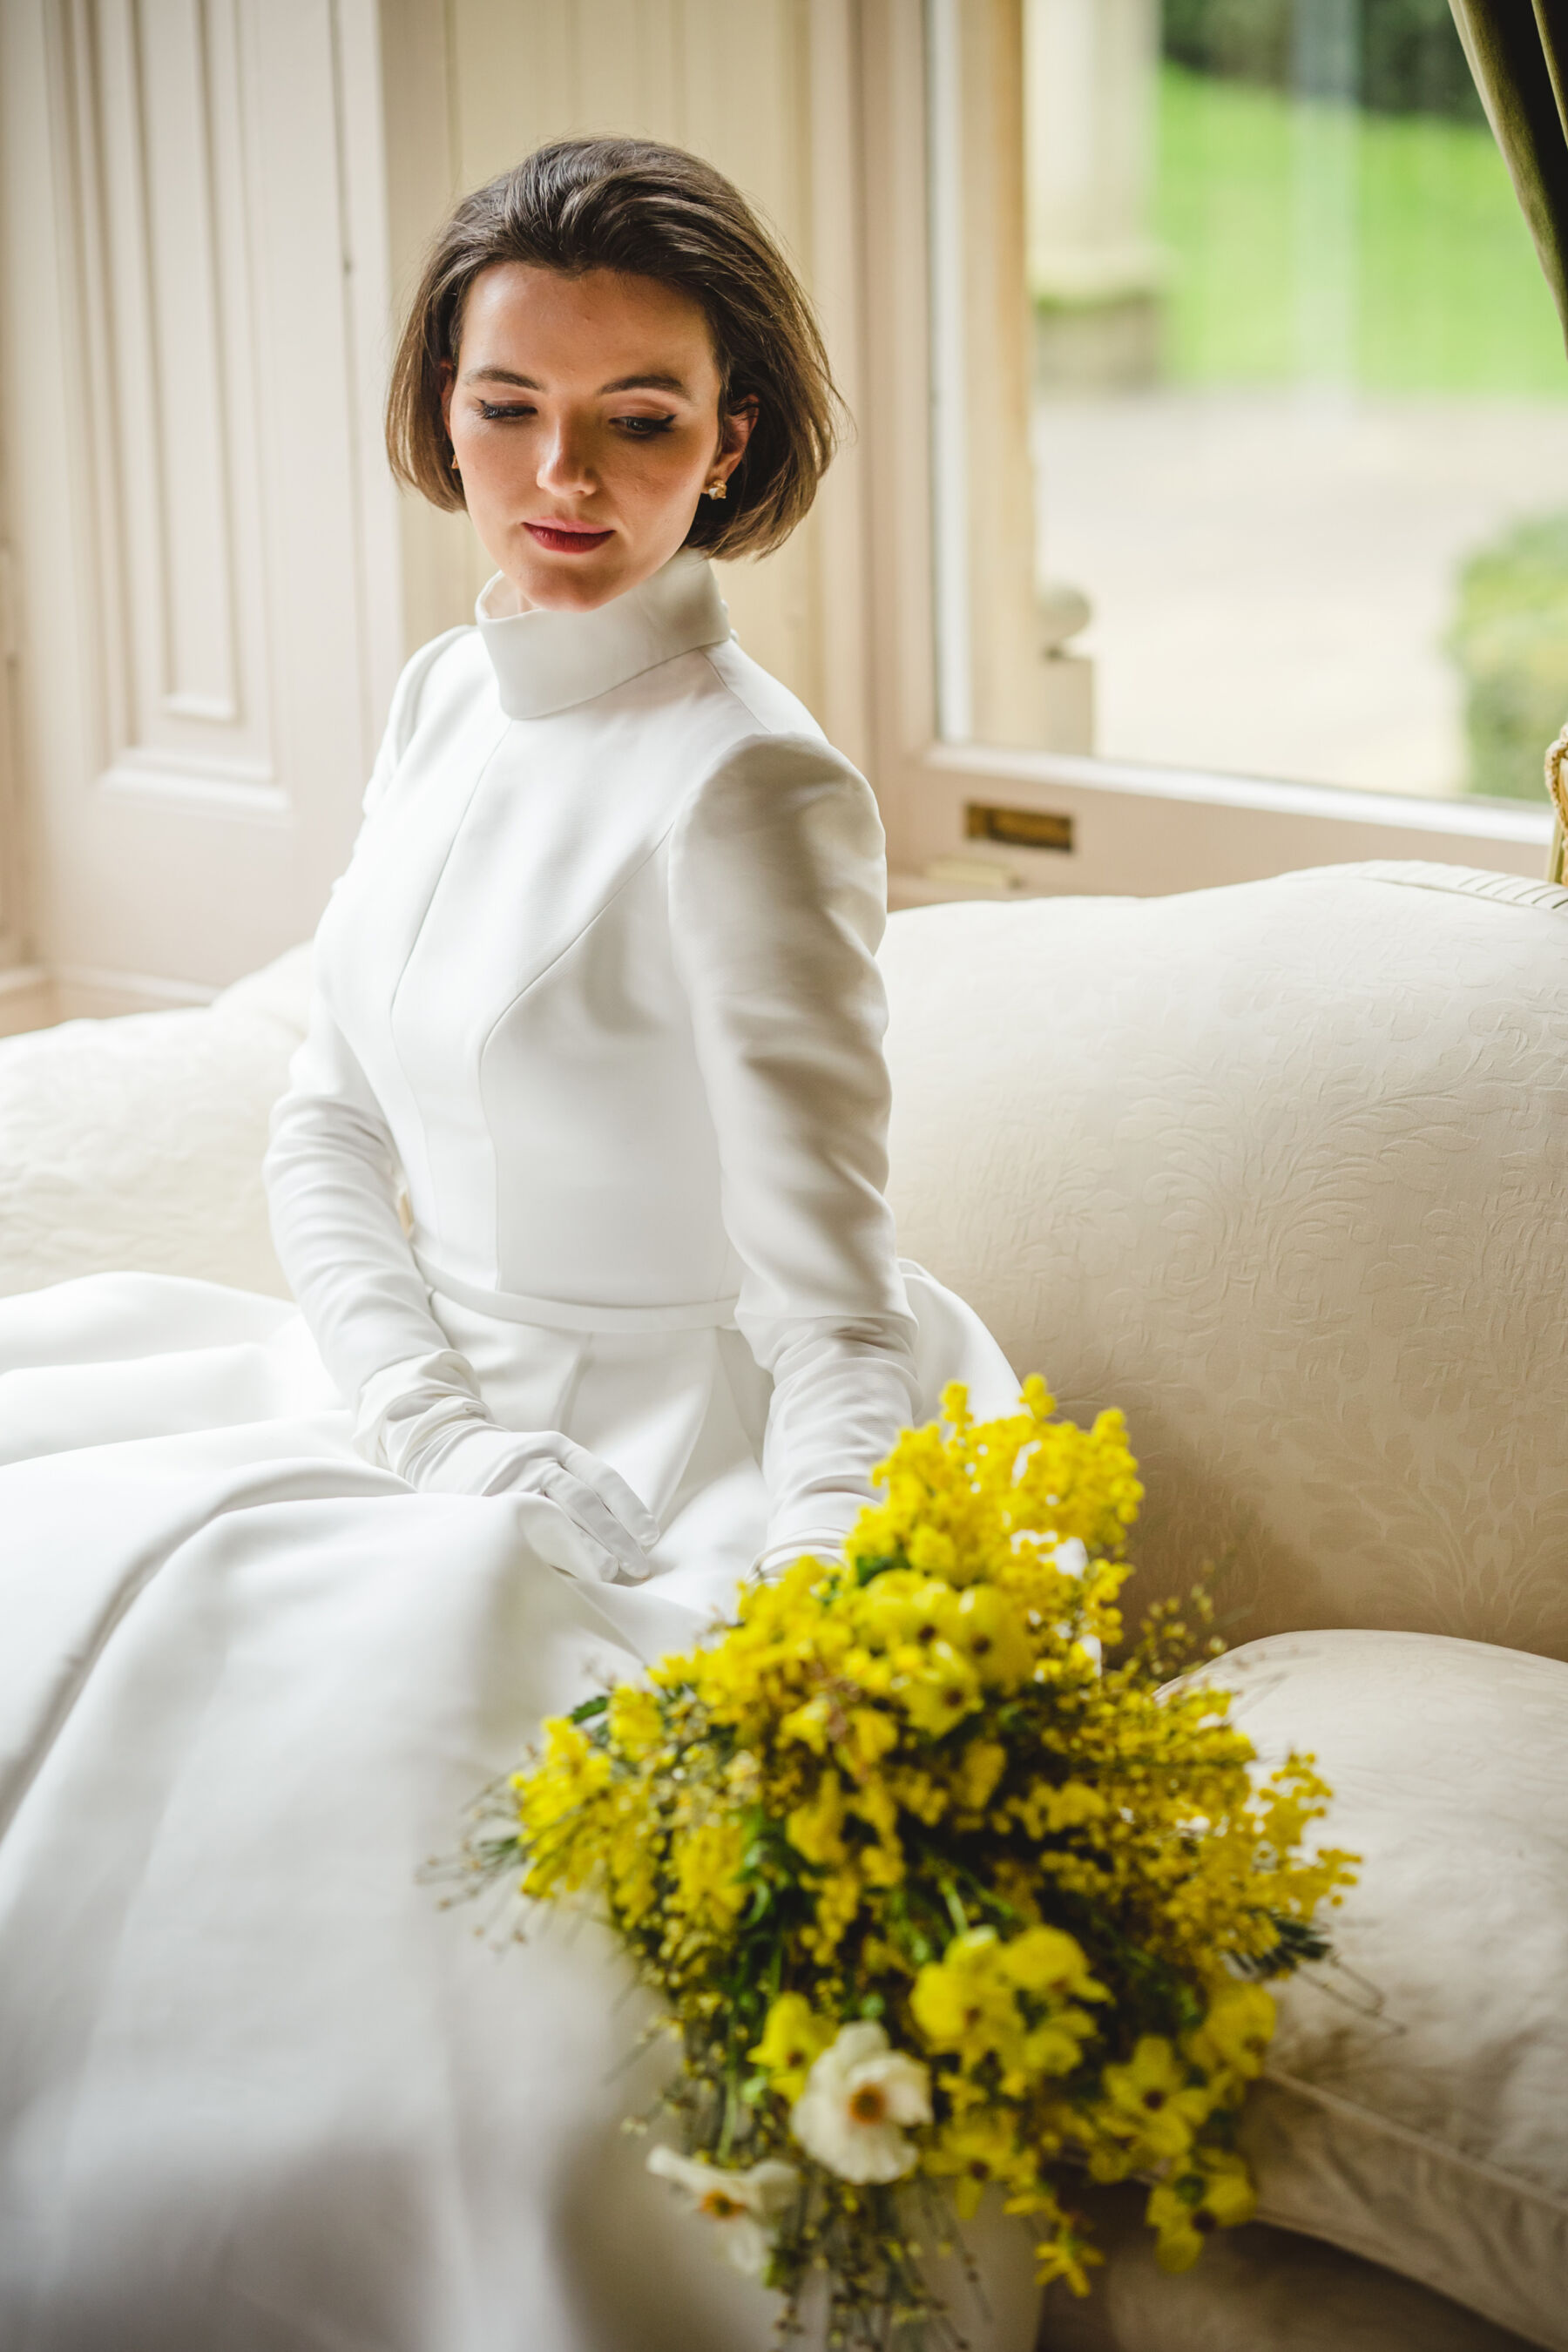 Long sleeved, high collar wedding dress by Jesus Peiro for Miss Bush bridal boutique, Surrey.